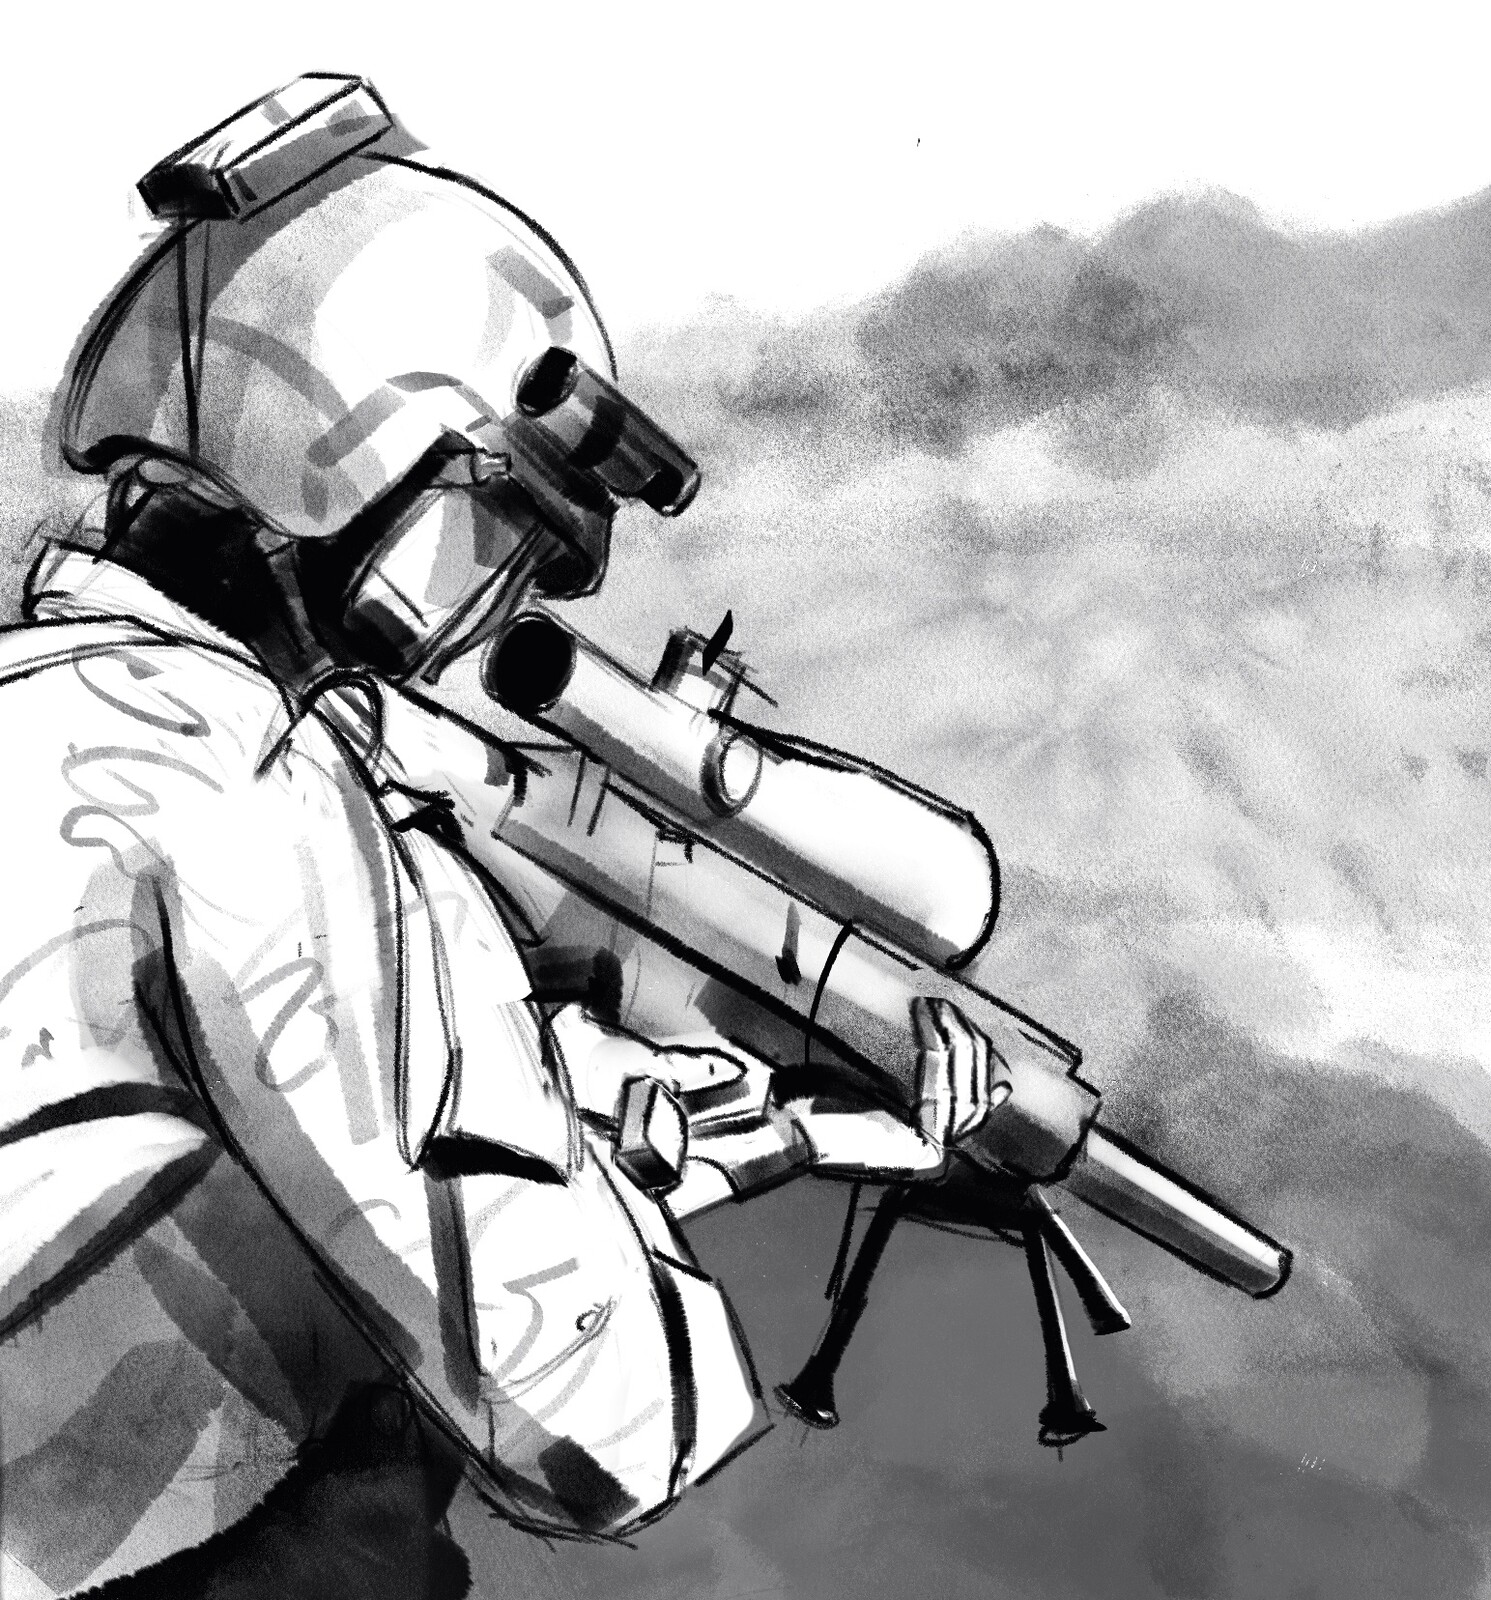 Day 26 - US Army Ranger